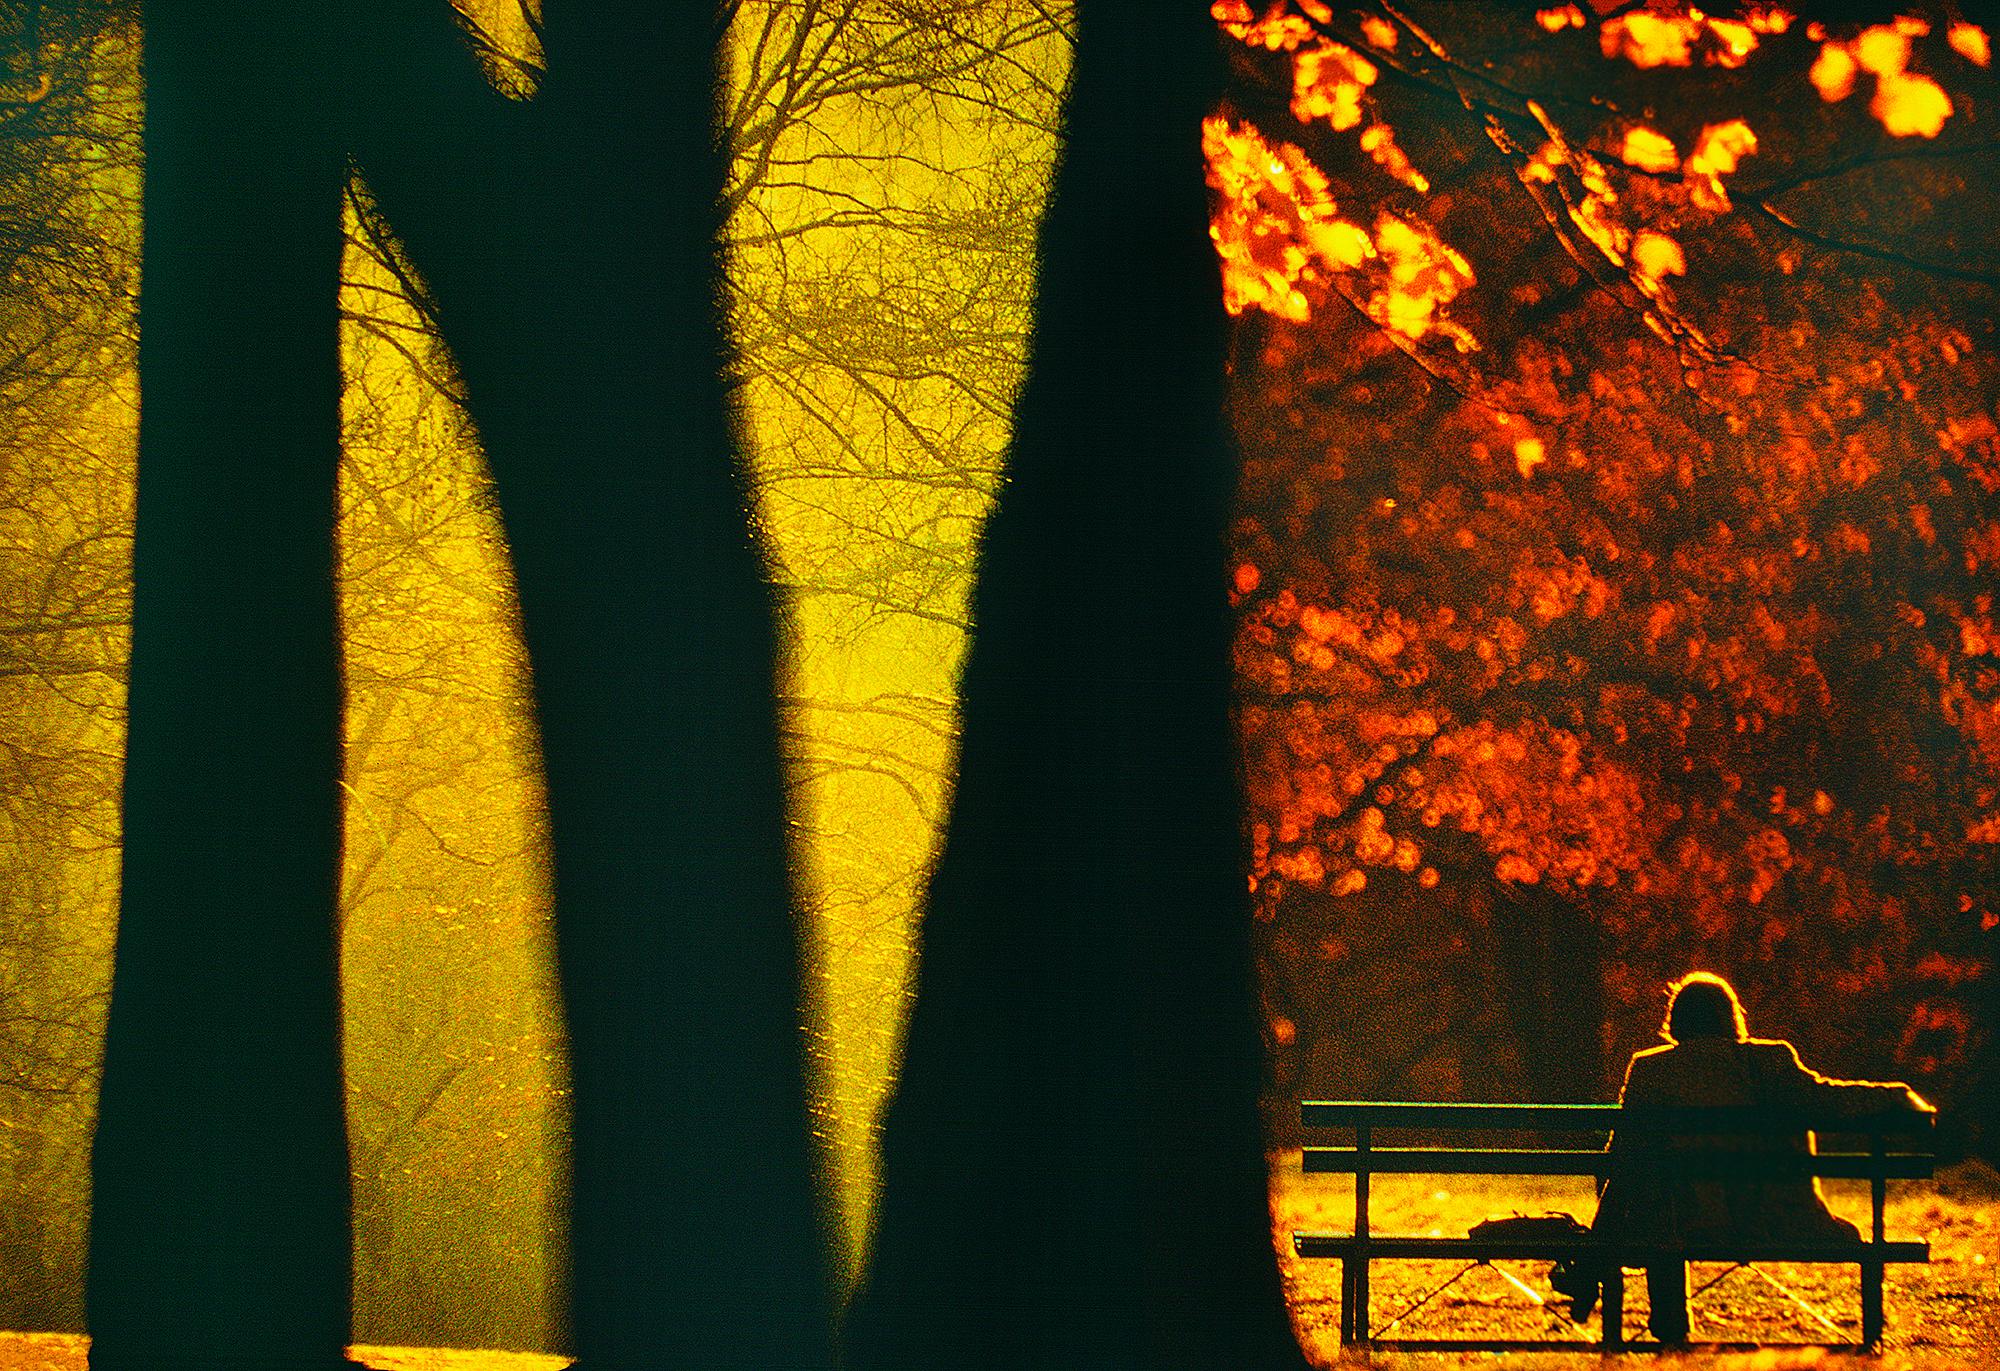 Mitchell Funk Figurative Photograph - Golden Light on Solitary Figure in Central Park 